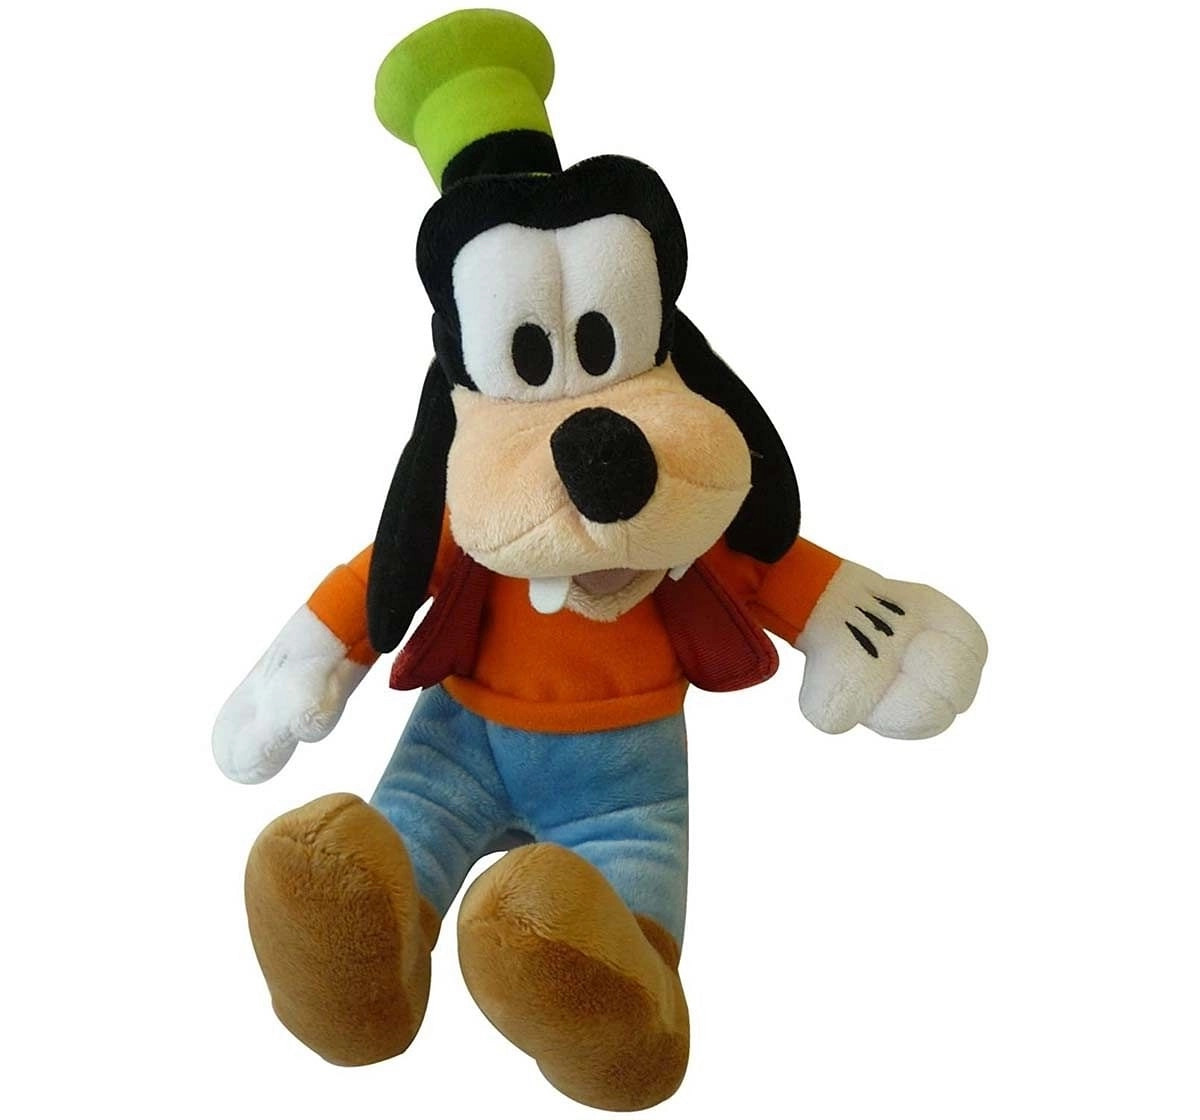 Dinsey Goofy Flopsies Plush 10" Character Soft Toys for Kids Age 1Y+ - 10.5 Cm